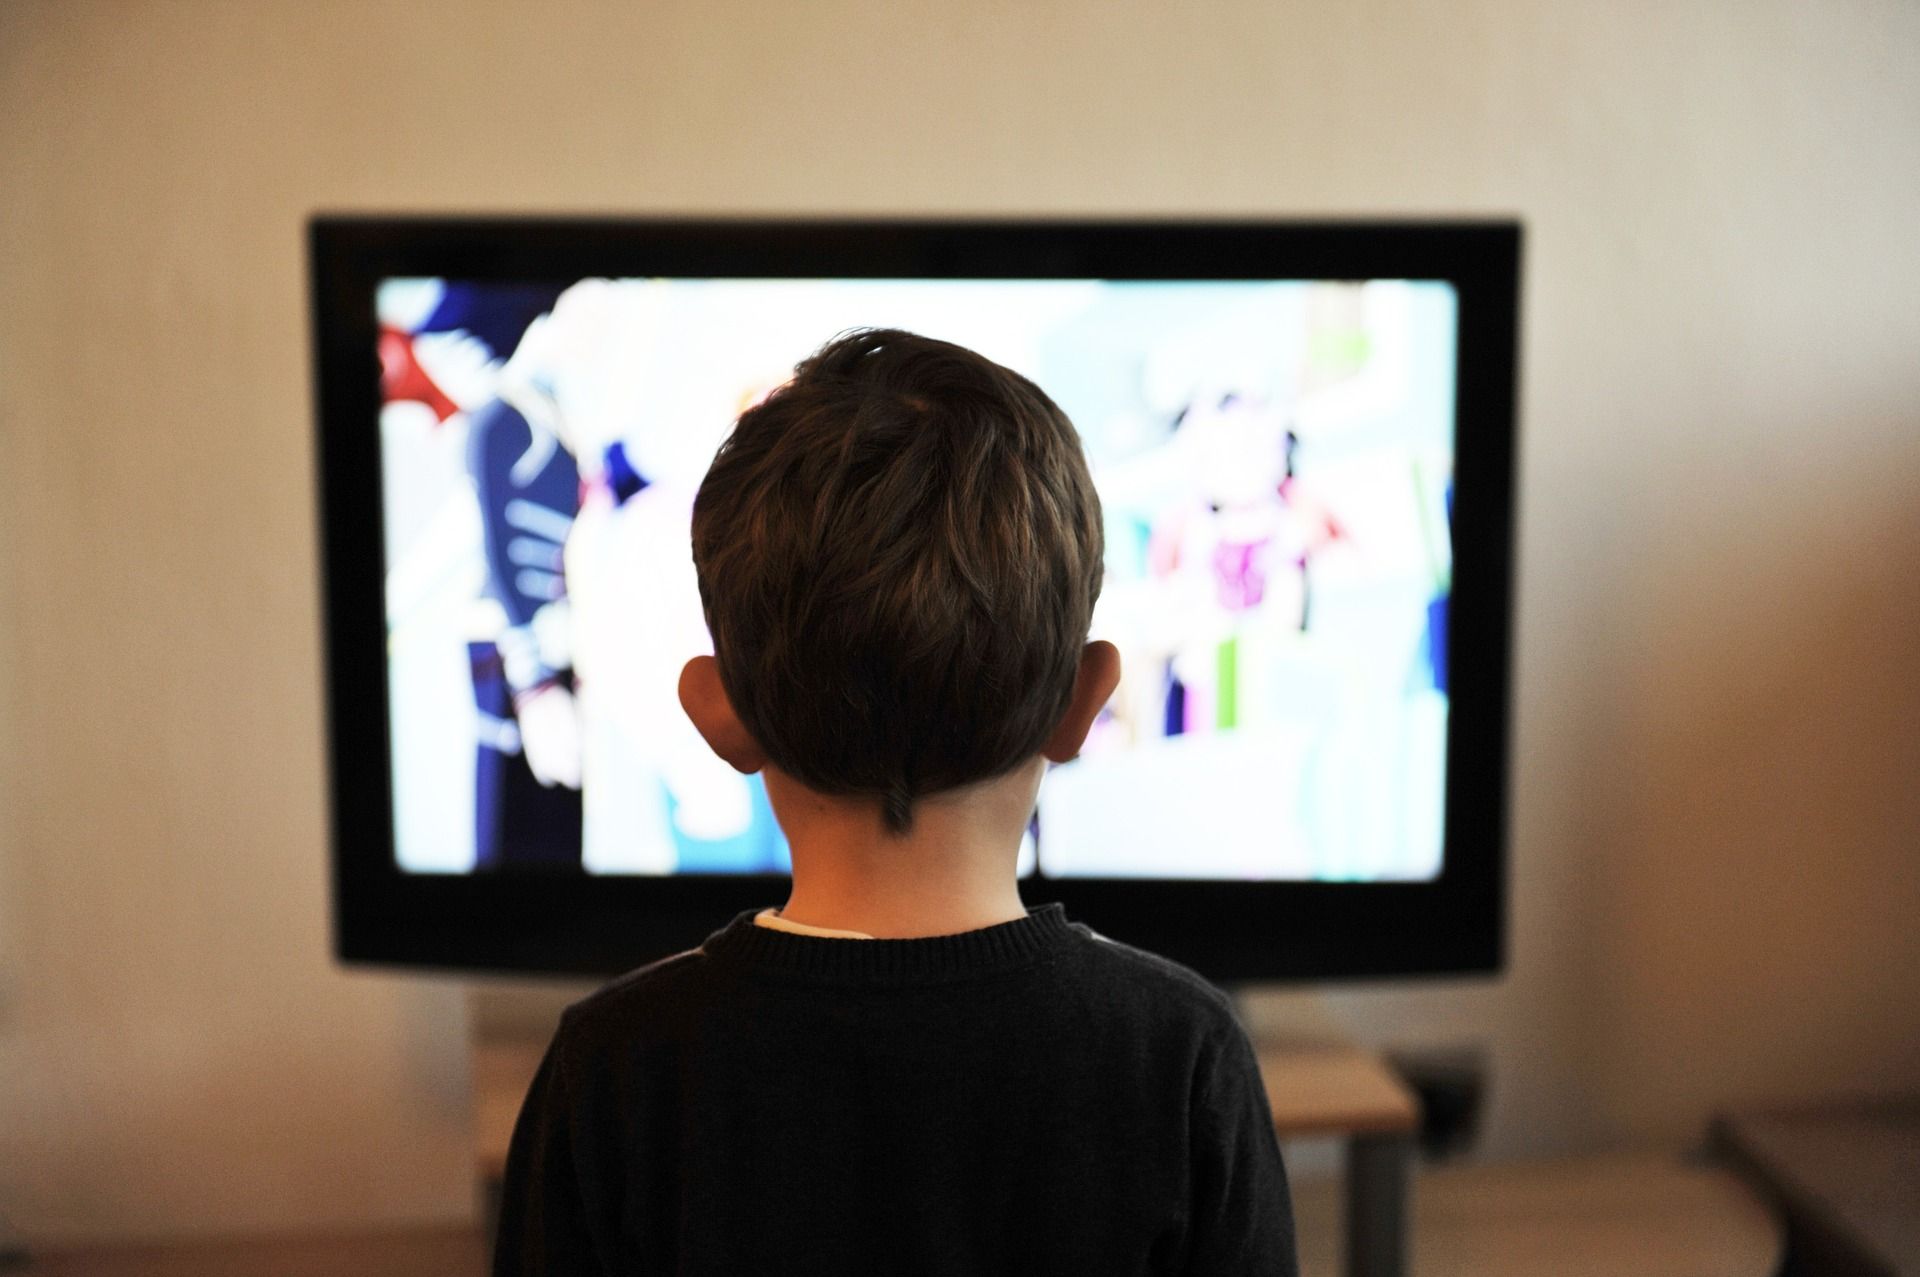 young child watching television